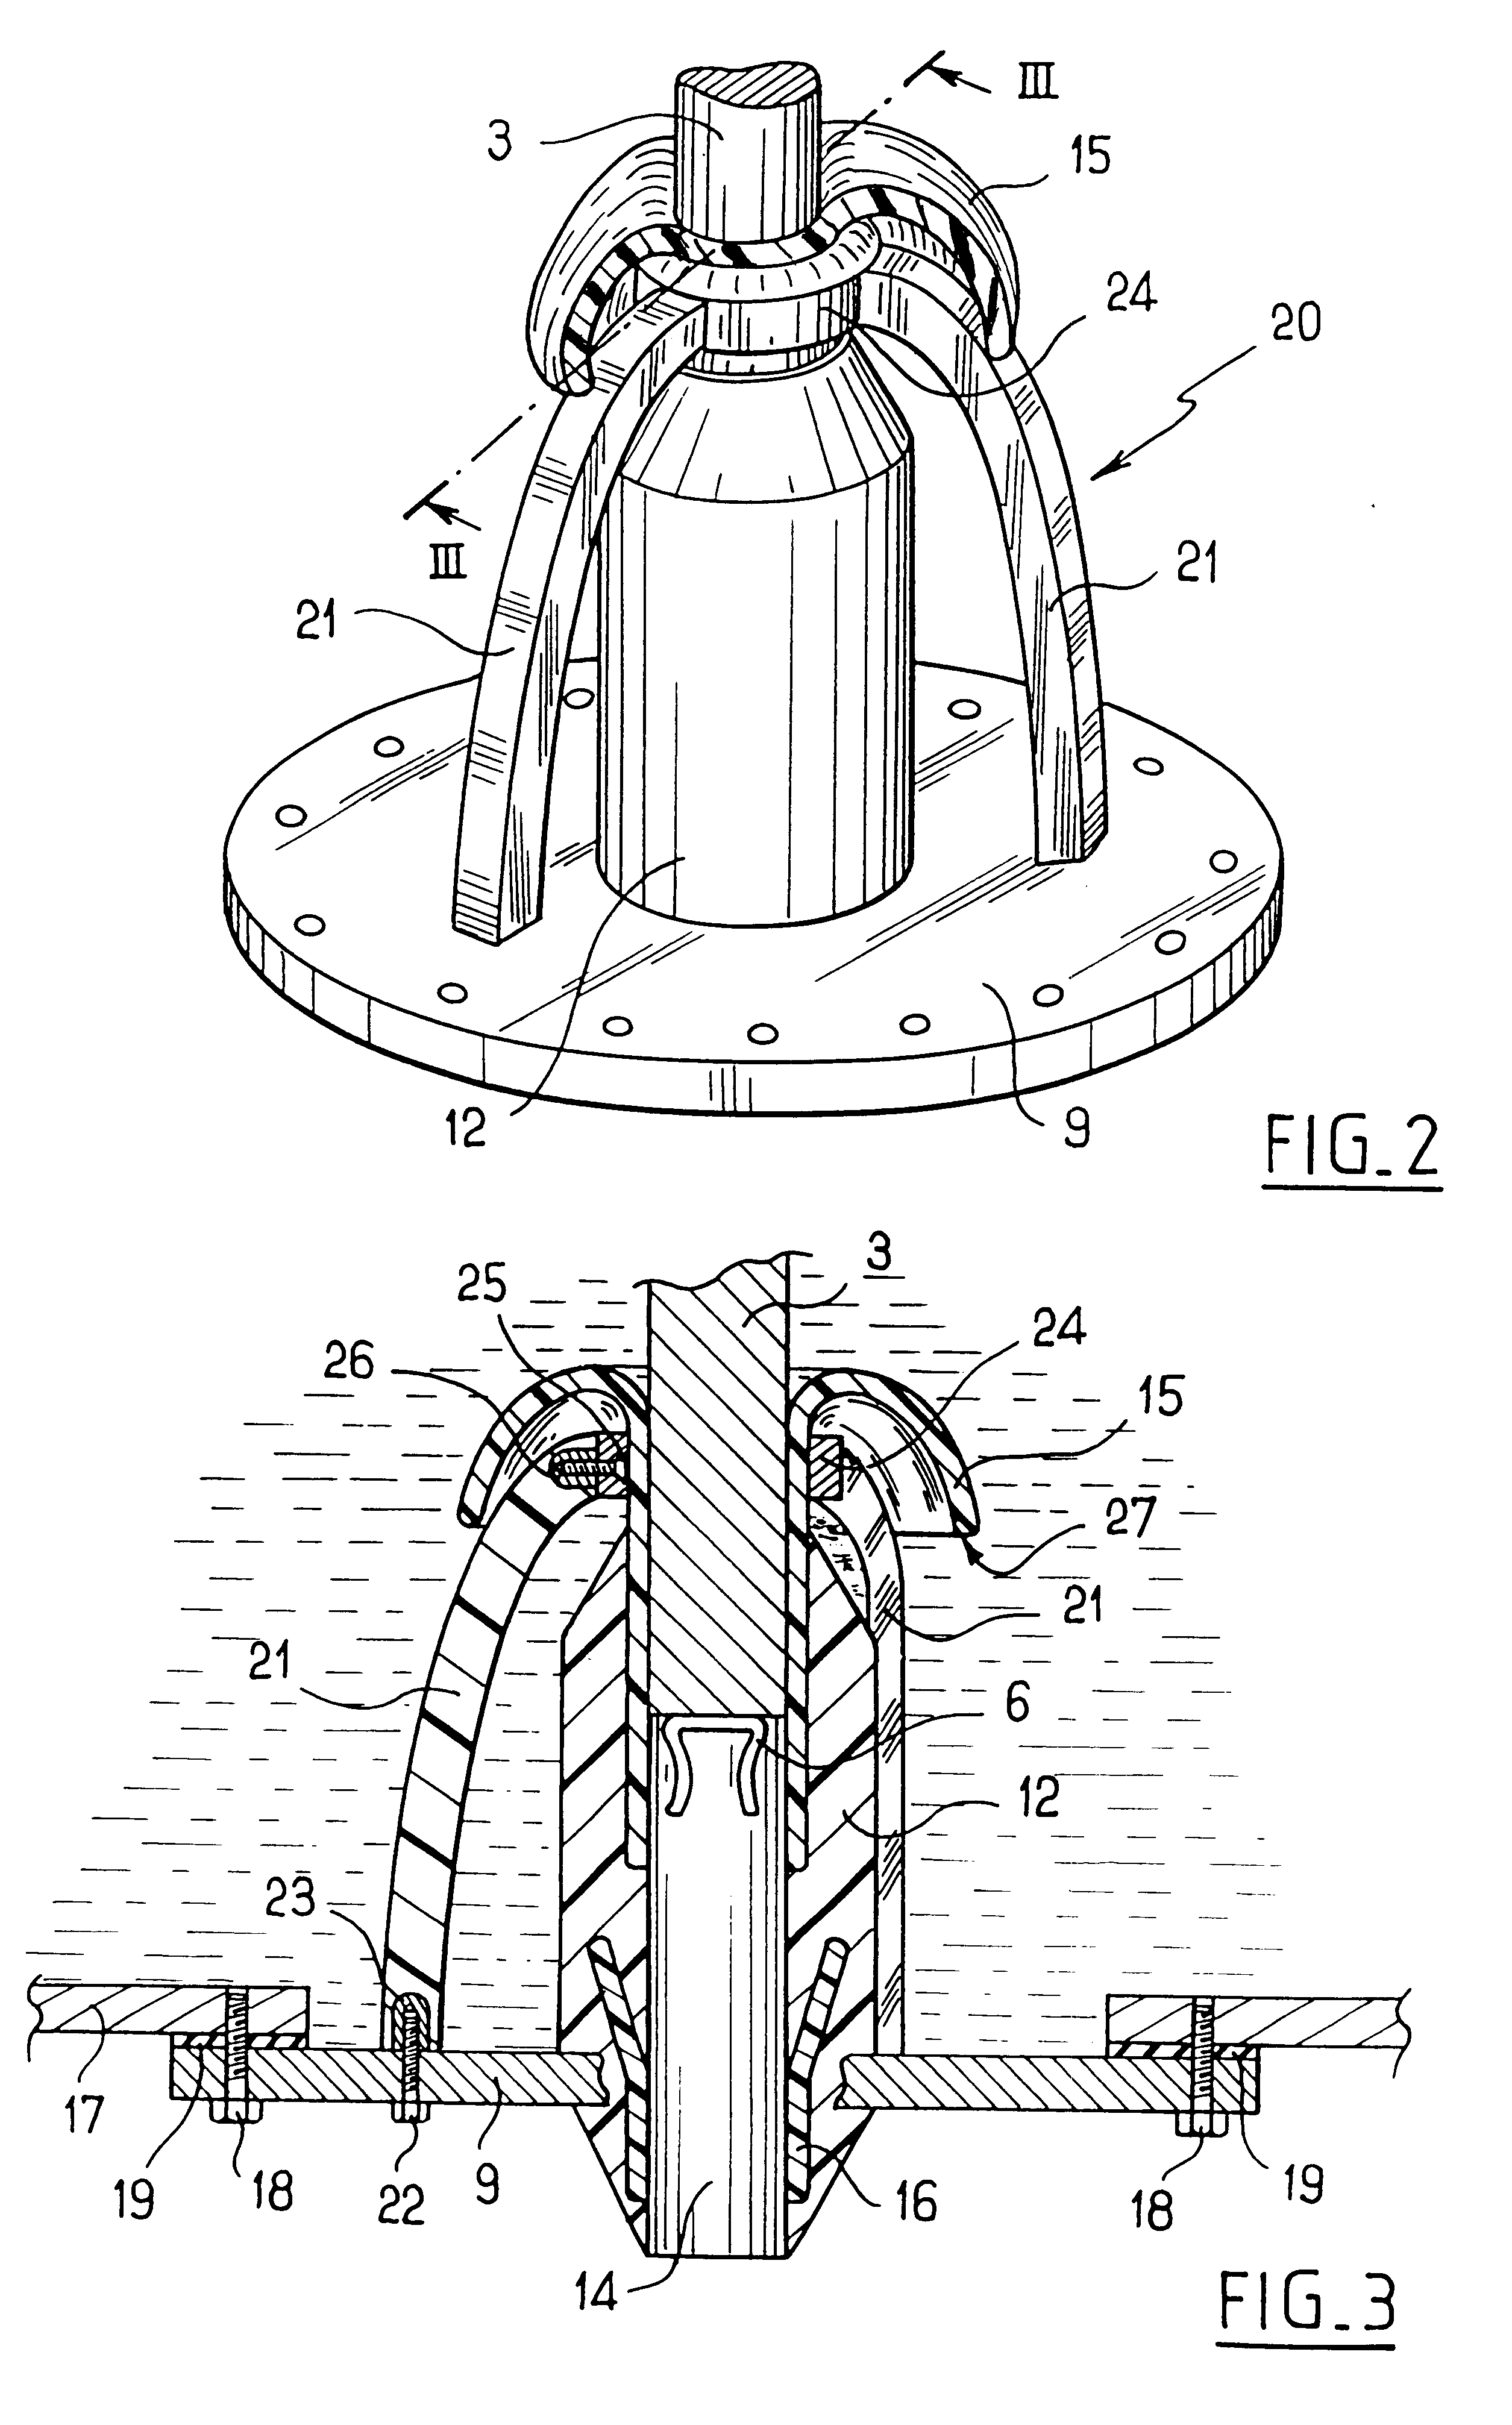 Fluid-insulated electrical link device